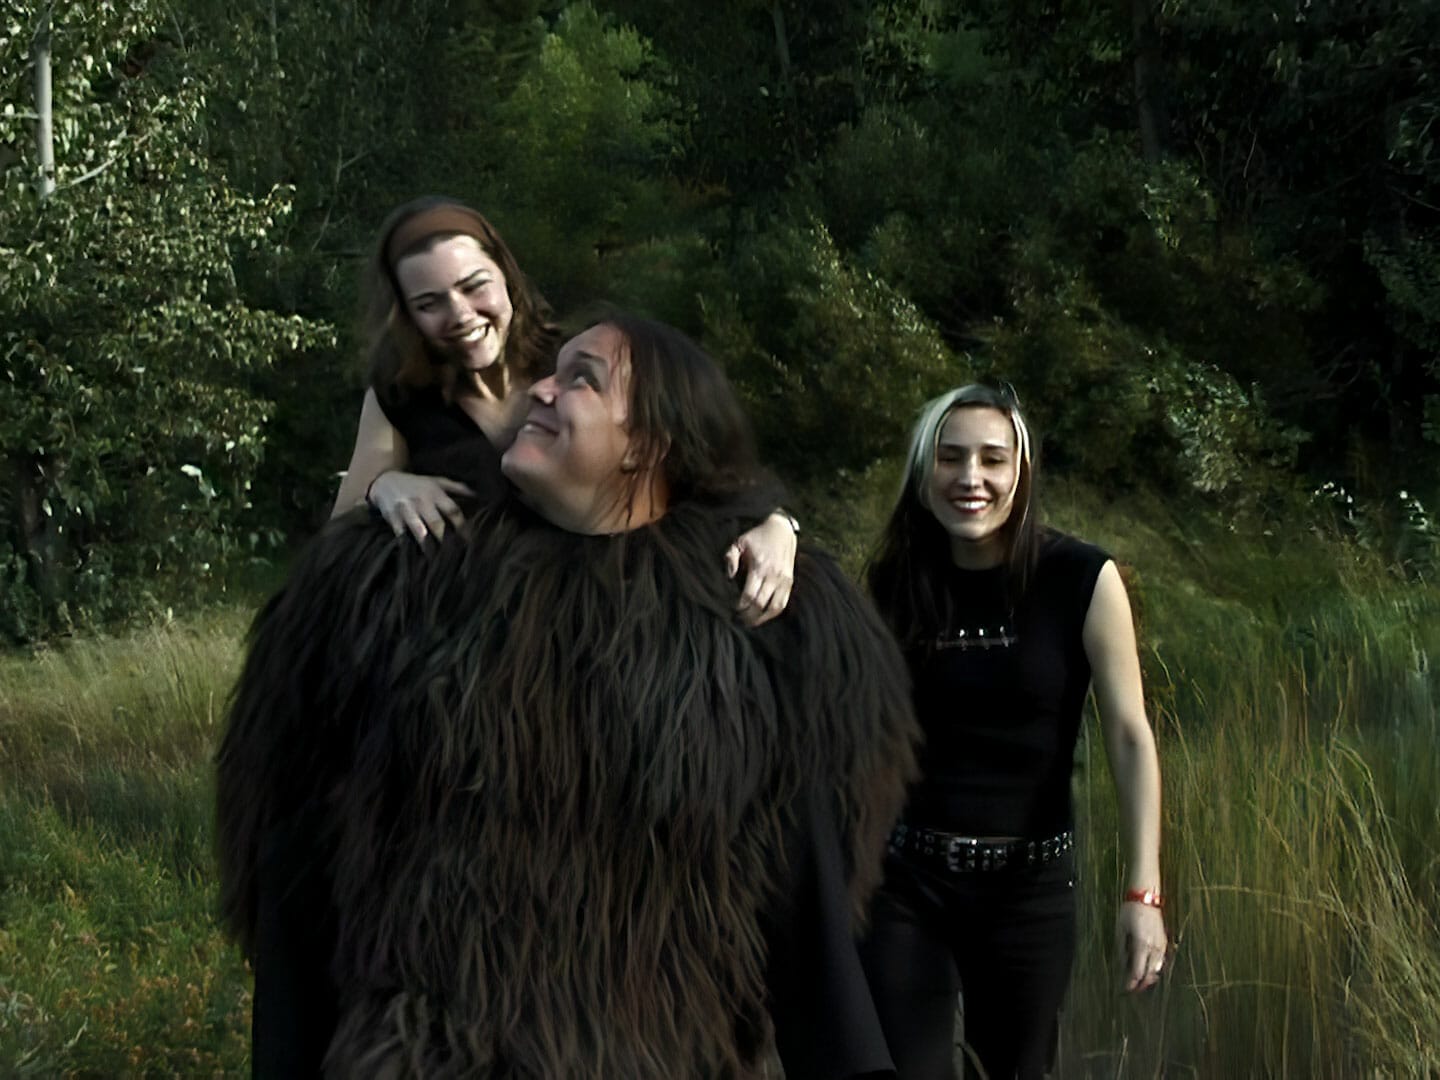 Two women dressed as Groovie Ghoulies standing next to a man dressed as a bigfoot at the Monster Club.